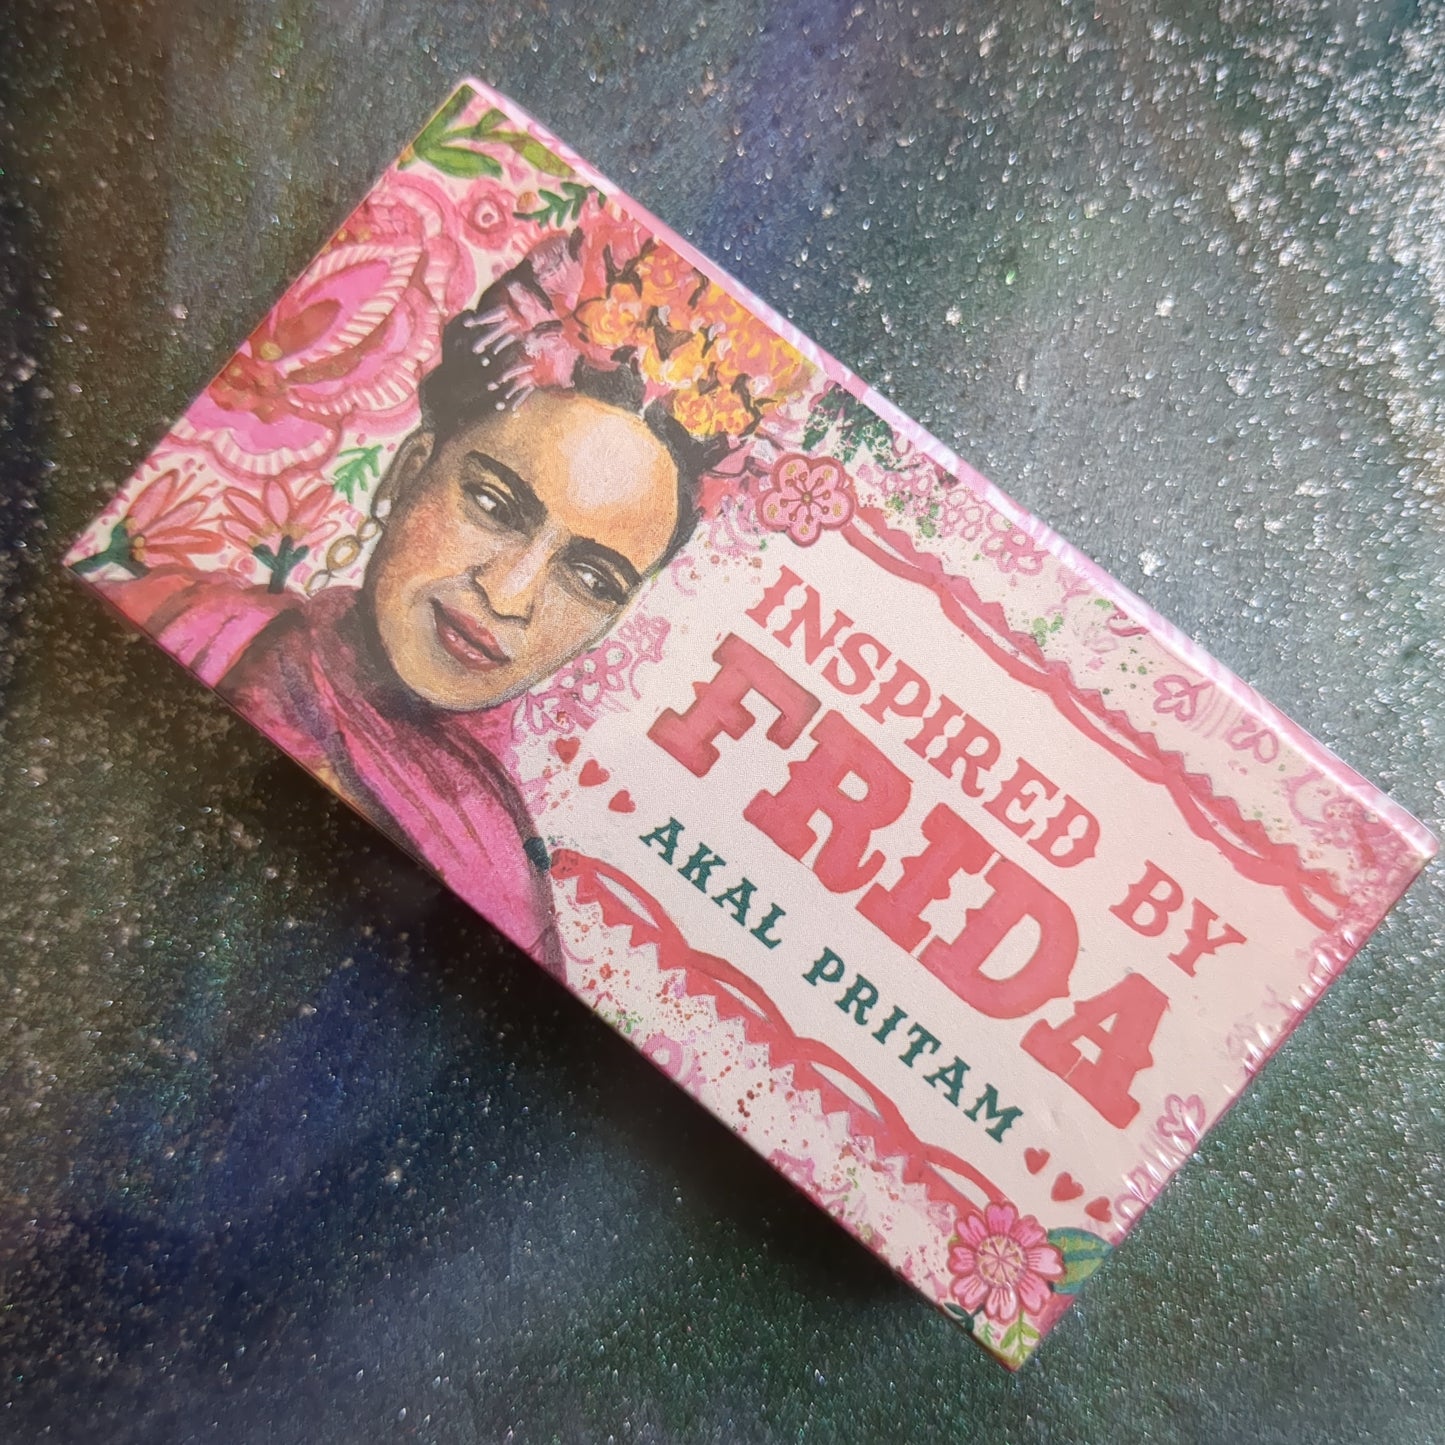 Inspired By Frida (Mini Inspiration Cards)